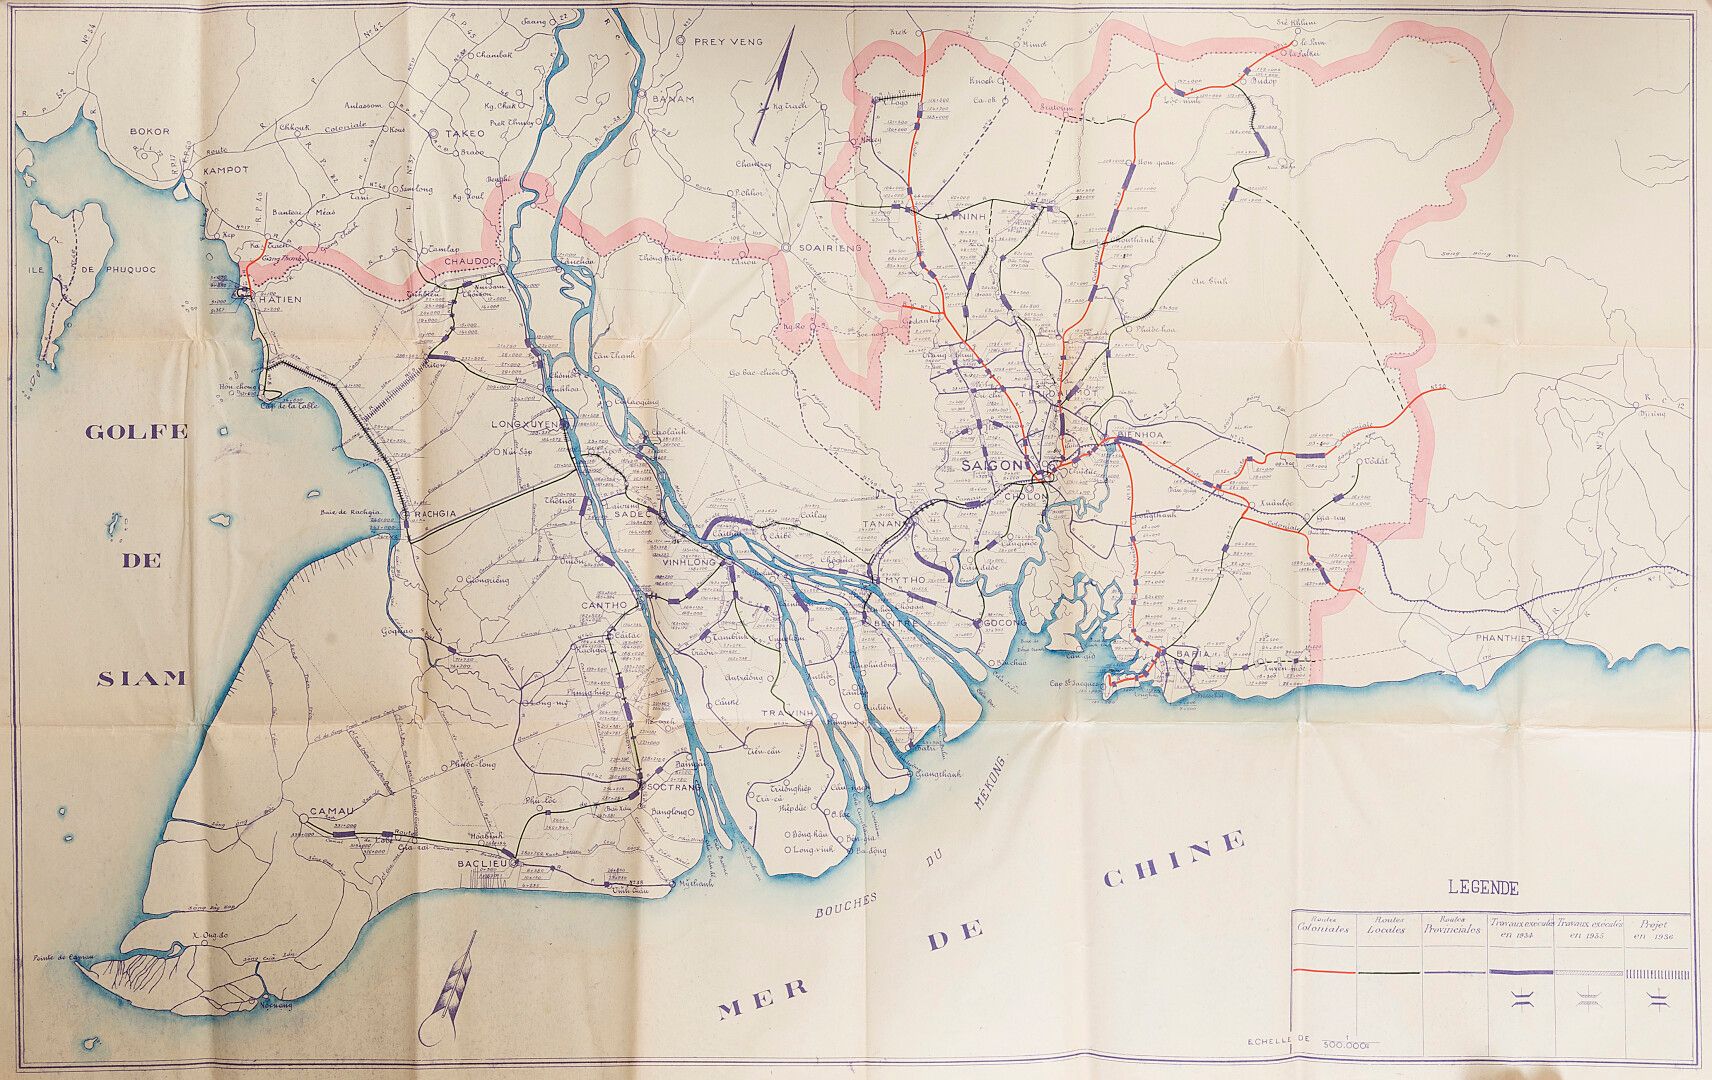 Null 1935. A road map of Cochinchina. 

Public works, working paper. With coloni&hellip;